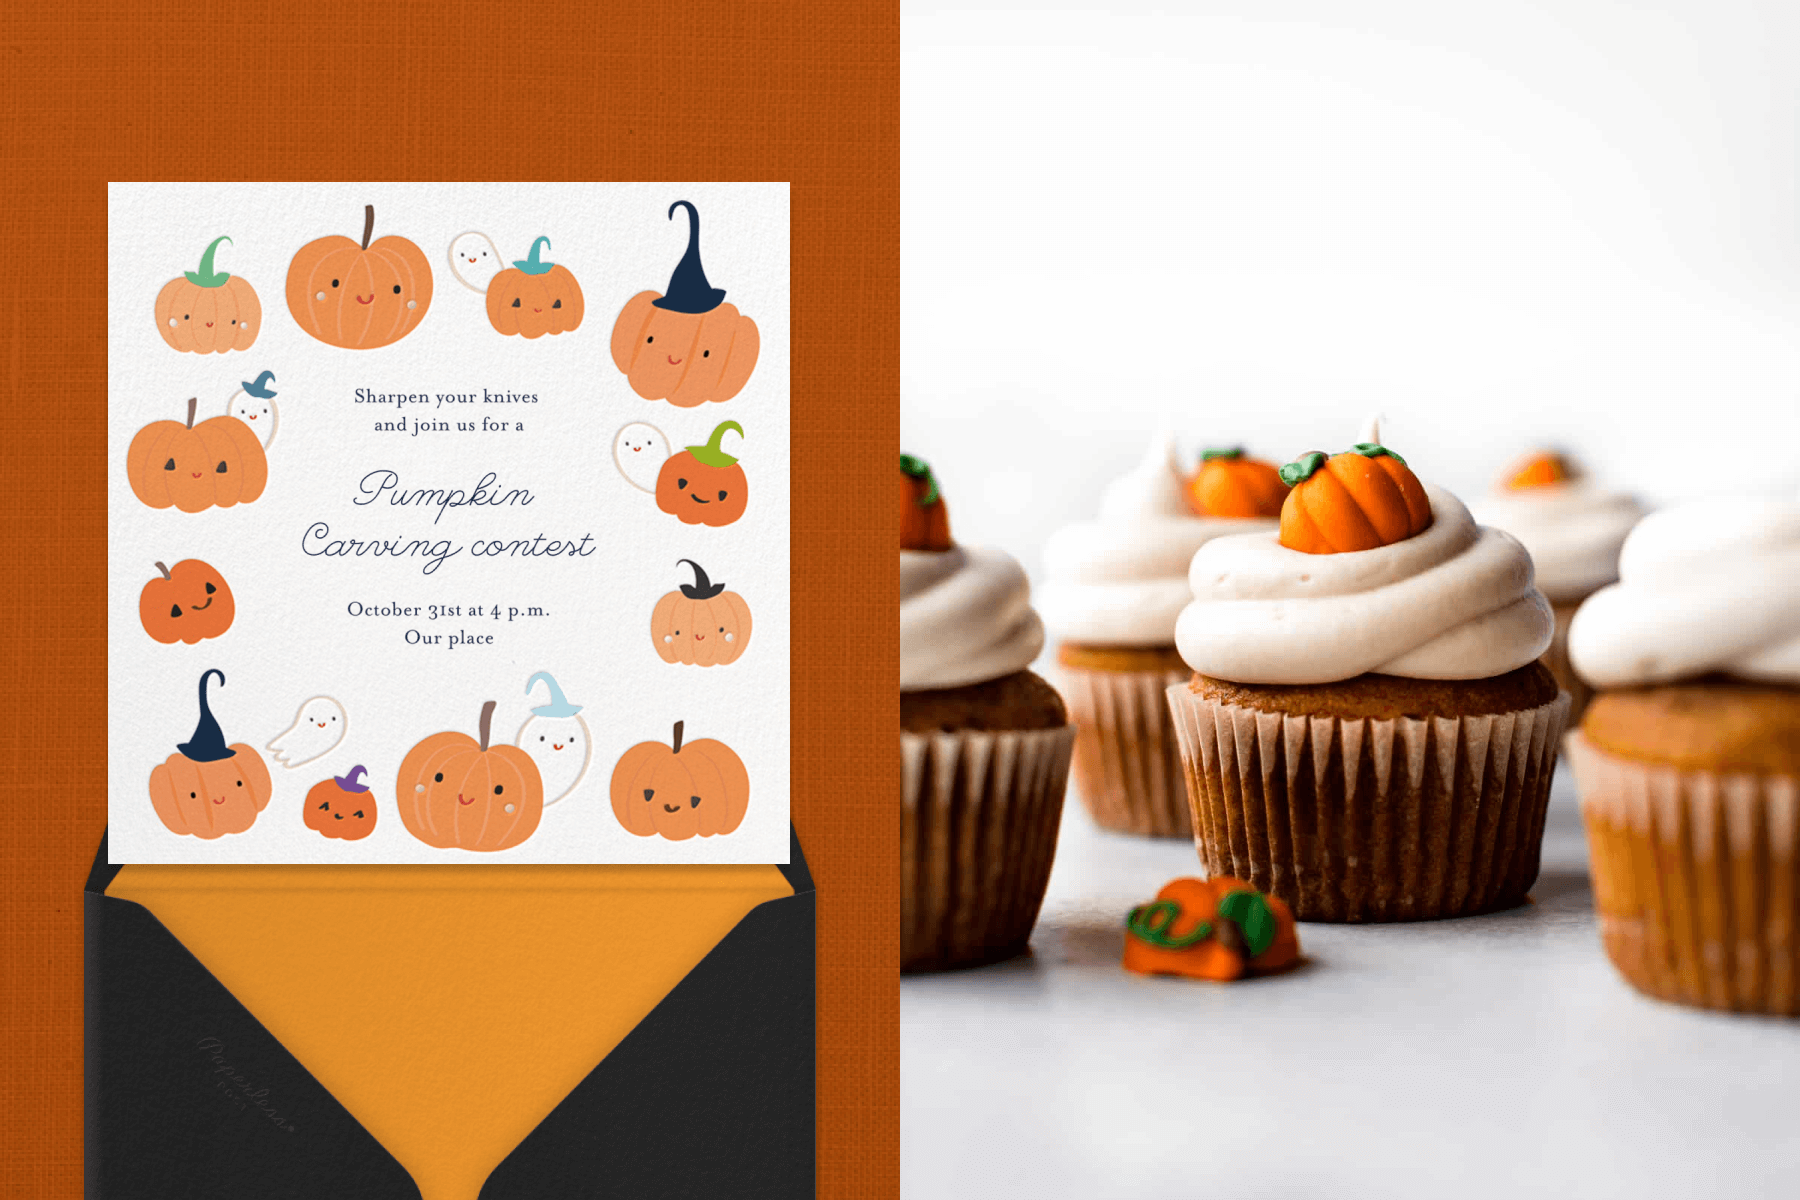 Left: A square pumpkin carving contest invitation with illustrated smiling pumpkins around the border. Right: Cupcakes with white frosting and mini fondant pumpkins on top.